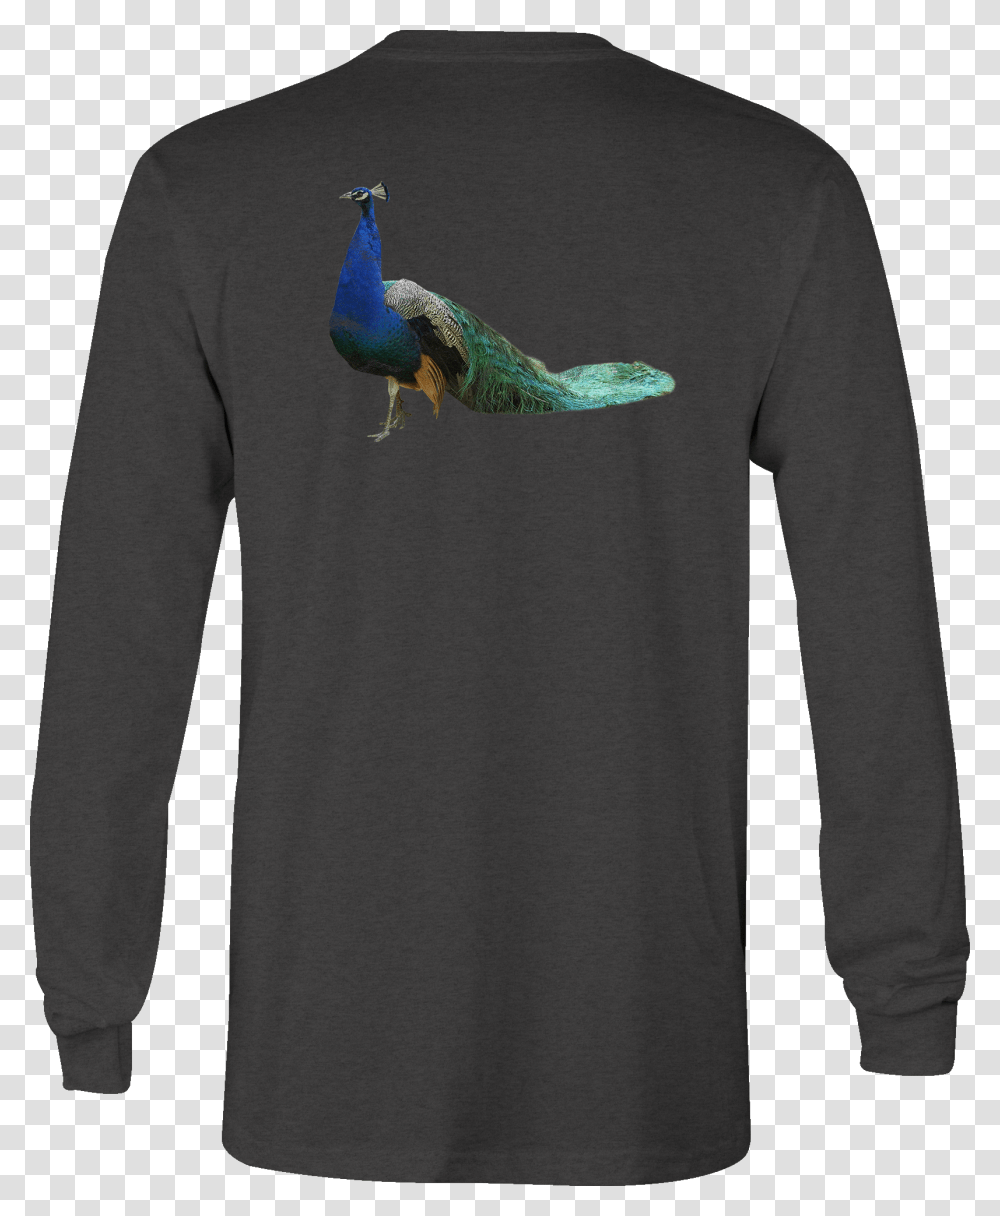 Long Sleeve Tshirt Peacock Feathers Shirt For Men Or T Shirt, Apparel, Bird, Animal Transparent Png